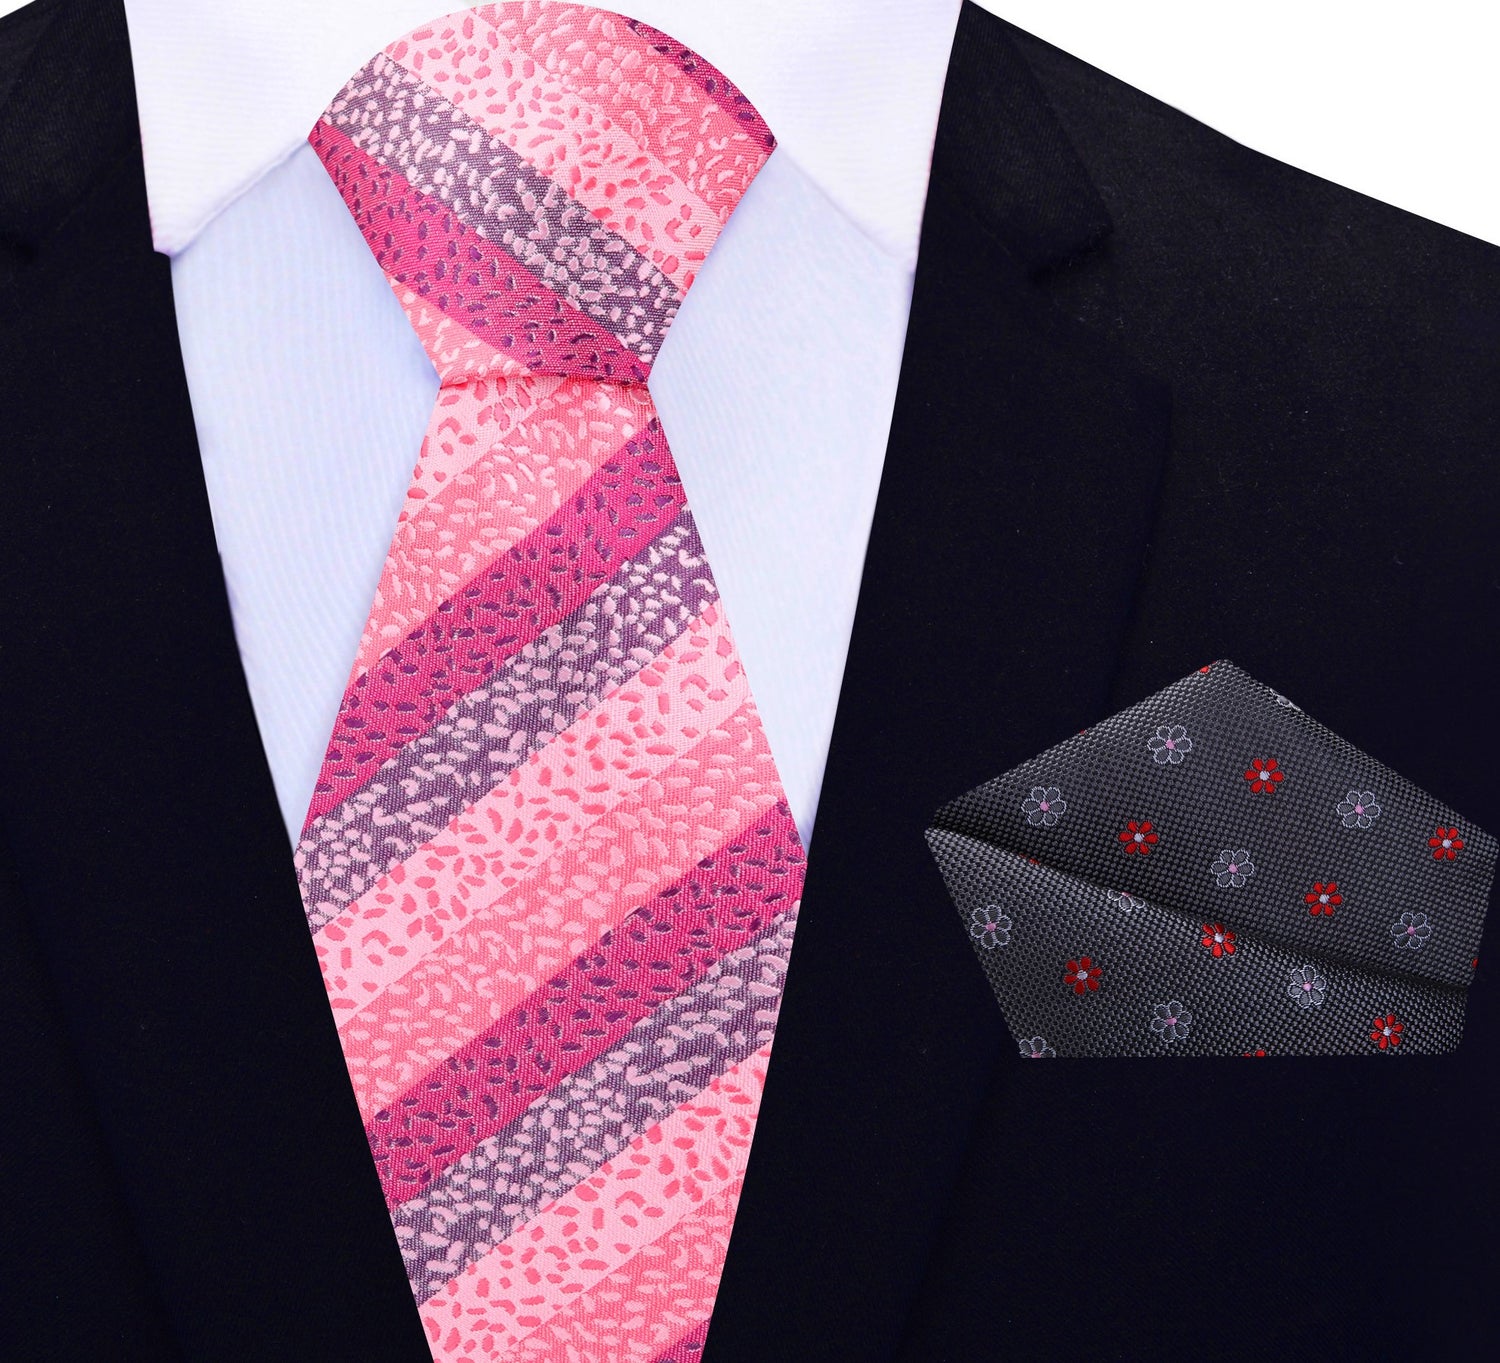 Shades of Pink with stripes and texture silk tie and accenting grey and pink floral pocket square